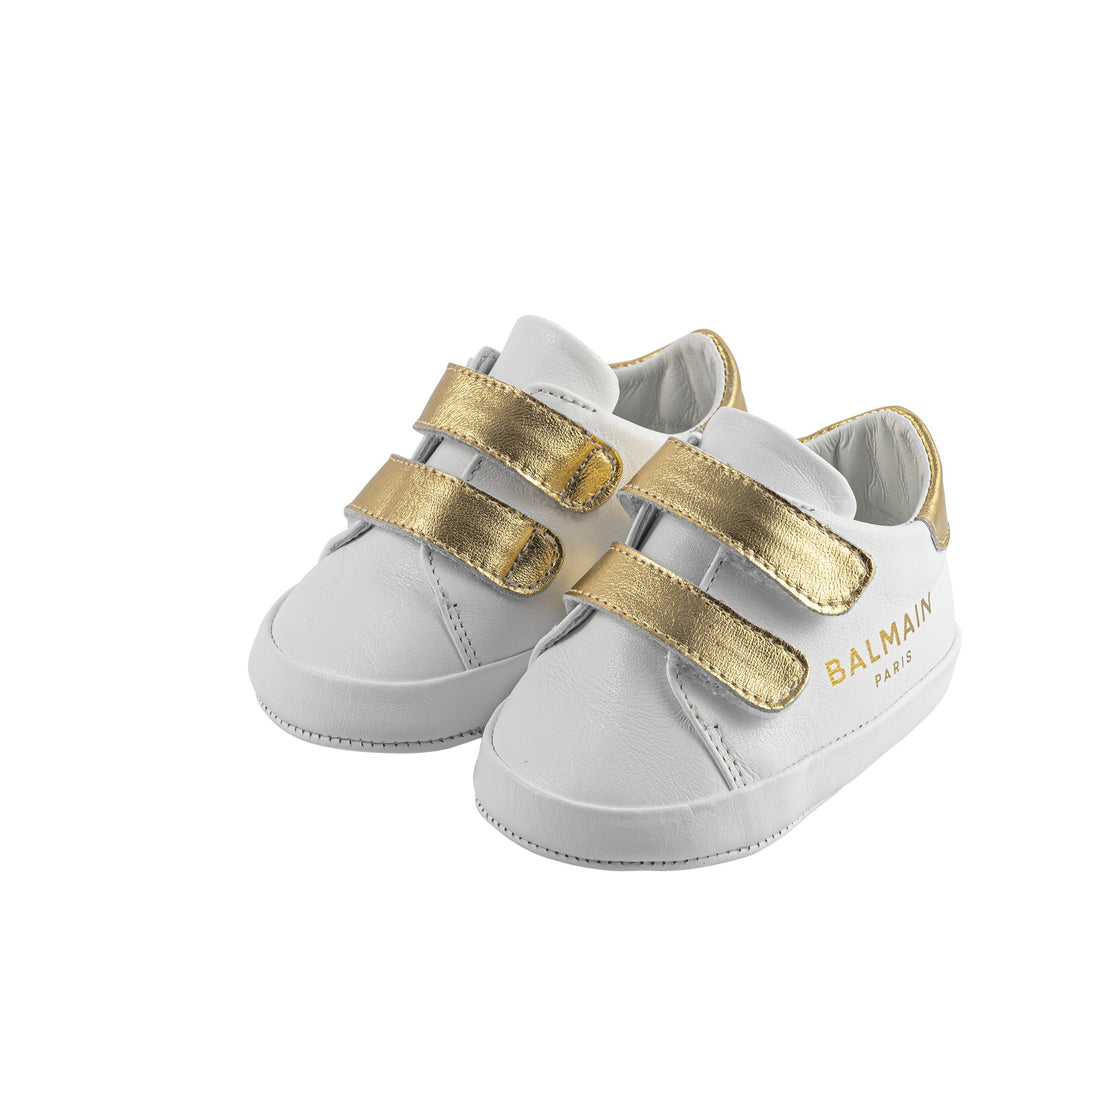 Balmain Trainers Style: Bs0586100Or